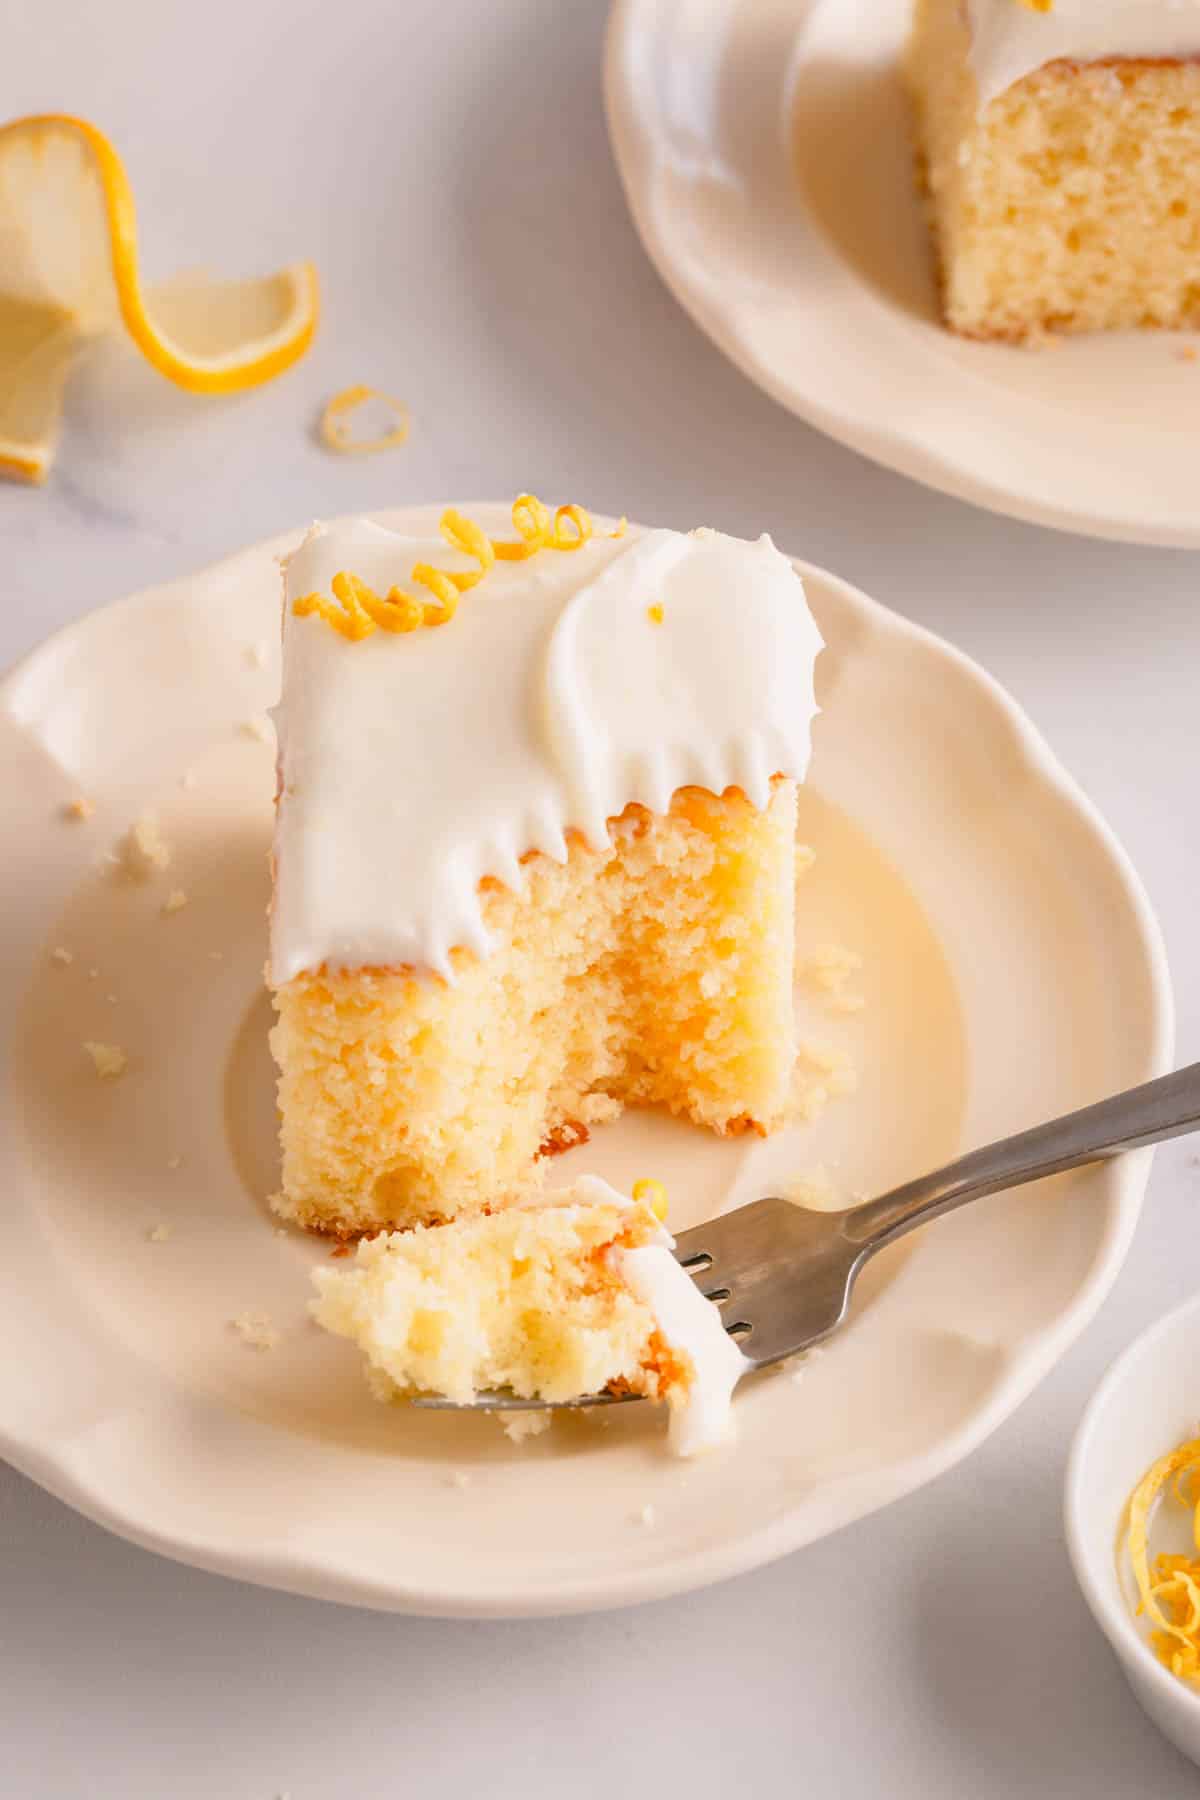 A slice of frosted lemon sheet cake on a plate with a fork holding a bite.